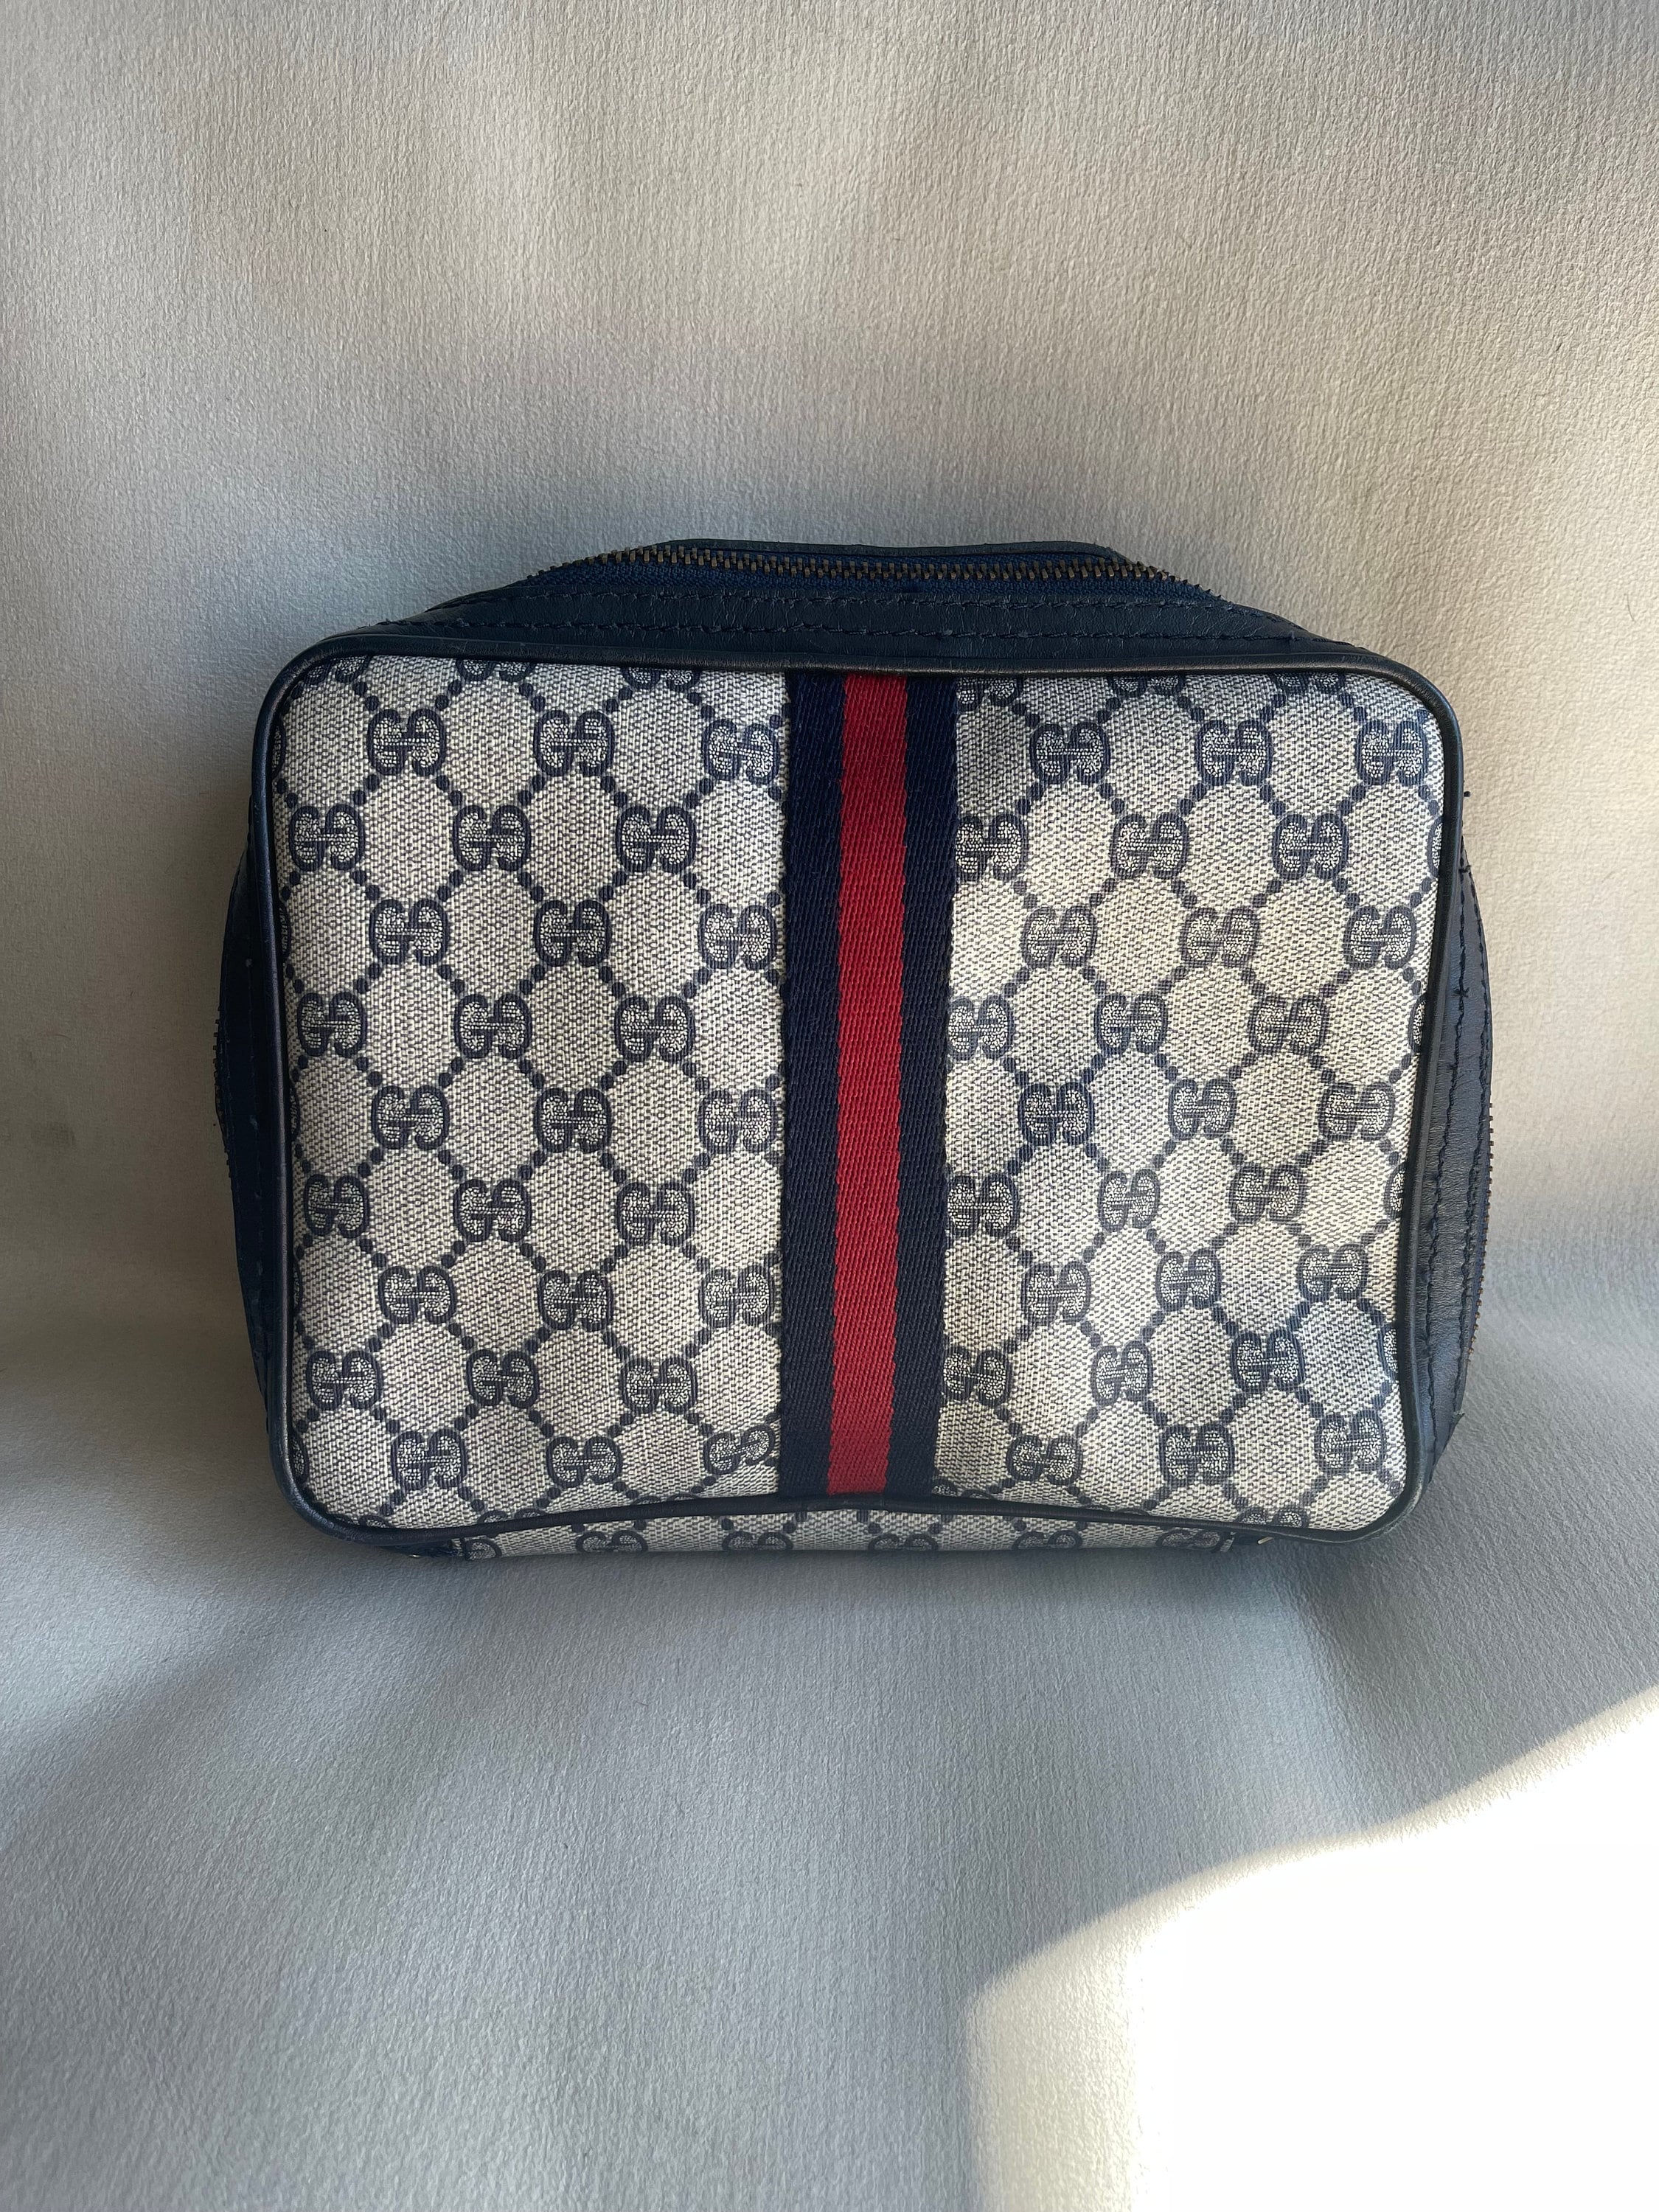 Gucci, Bags, Brand New Gucci Toiletry Bag Authentic